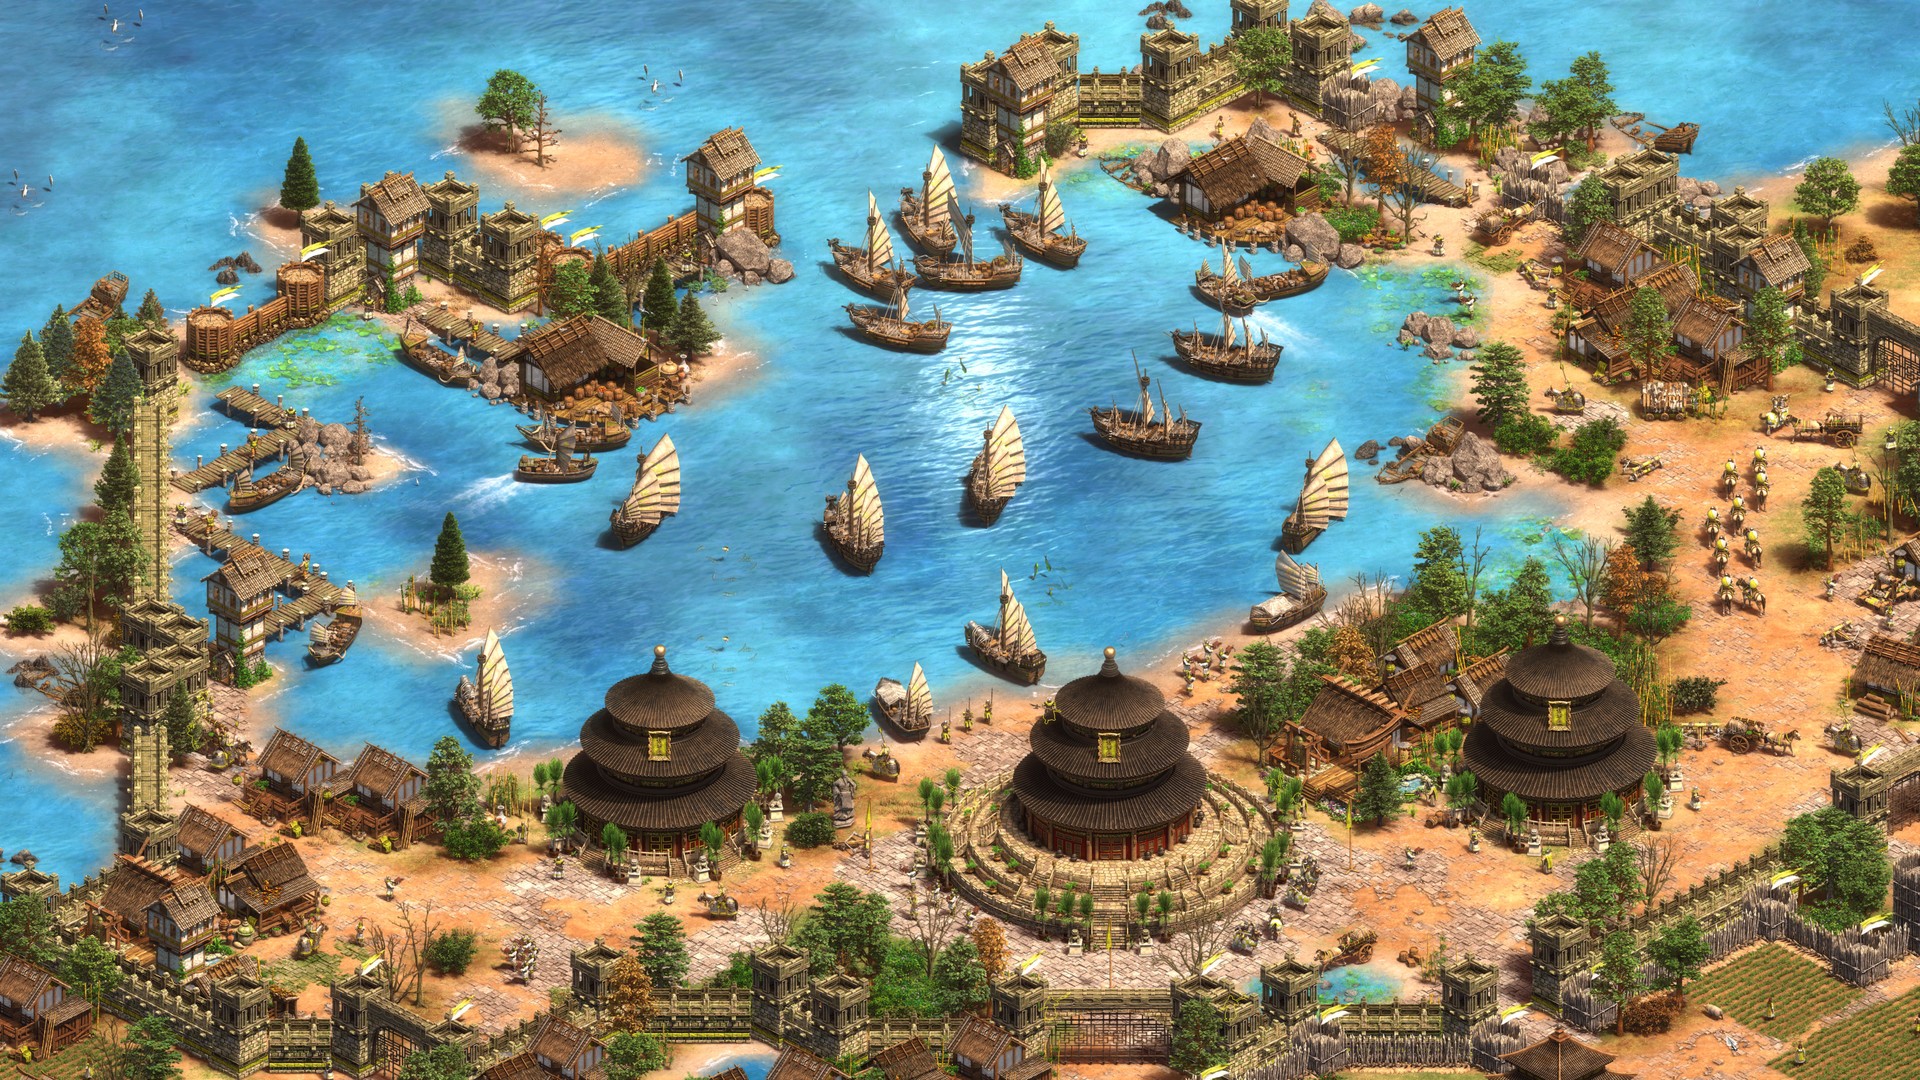 download age of empire 3 definitive edition